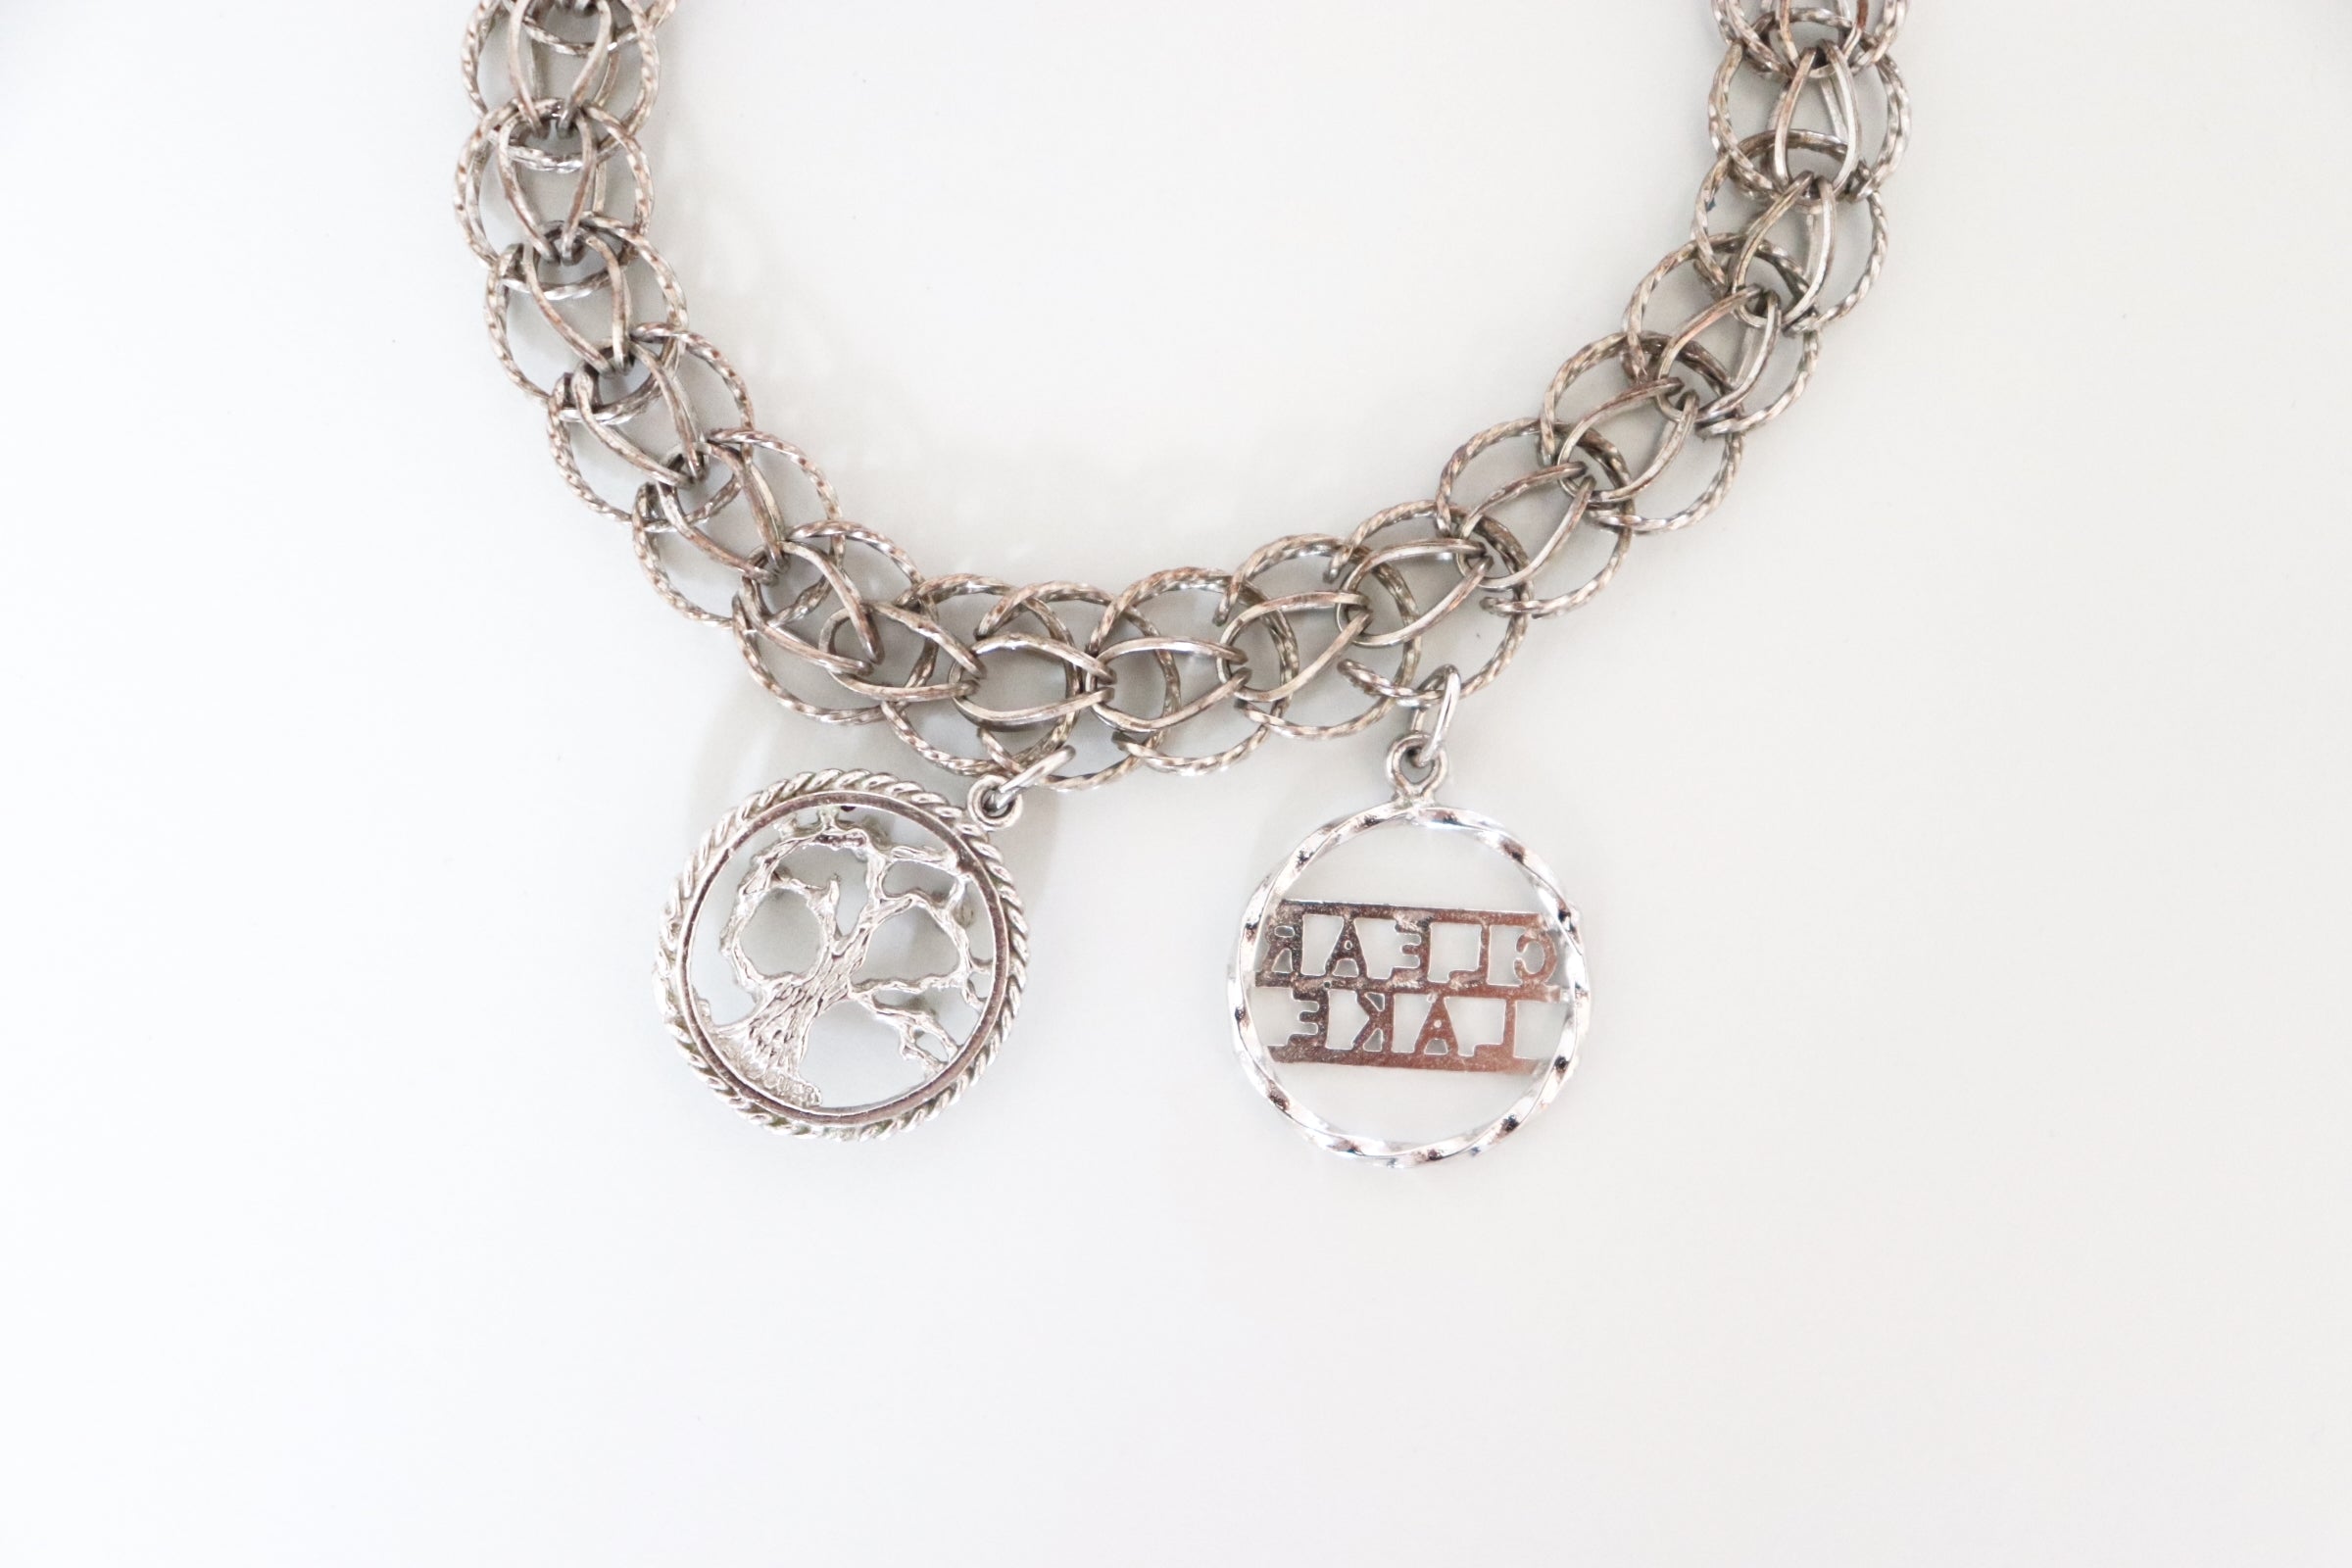 Classic Vintage Sterling Silver Charm Bracelet with Two Charms